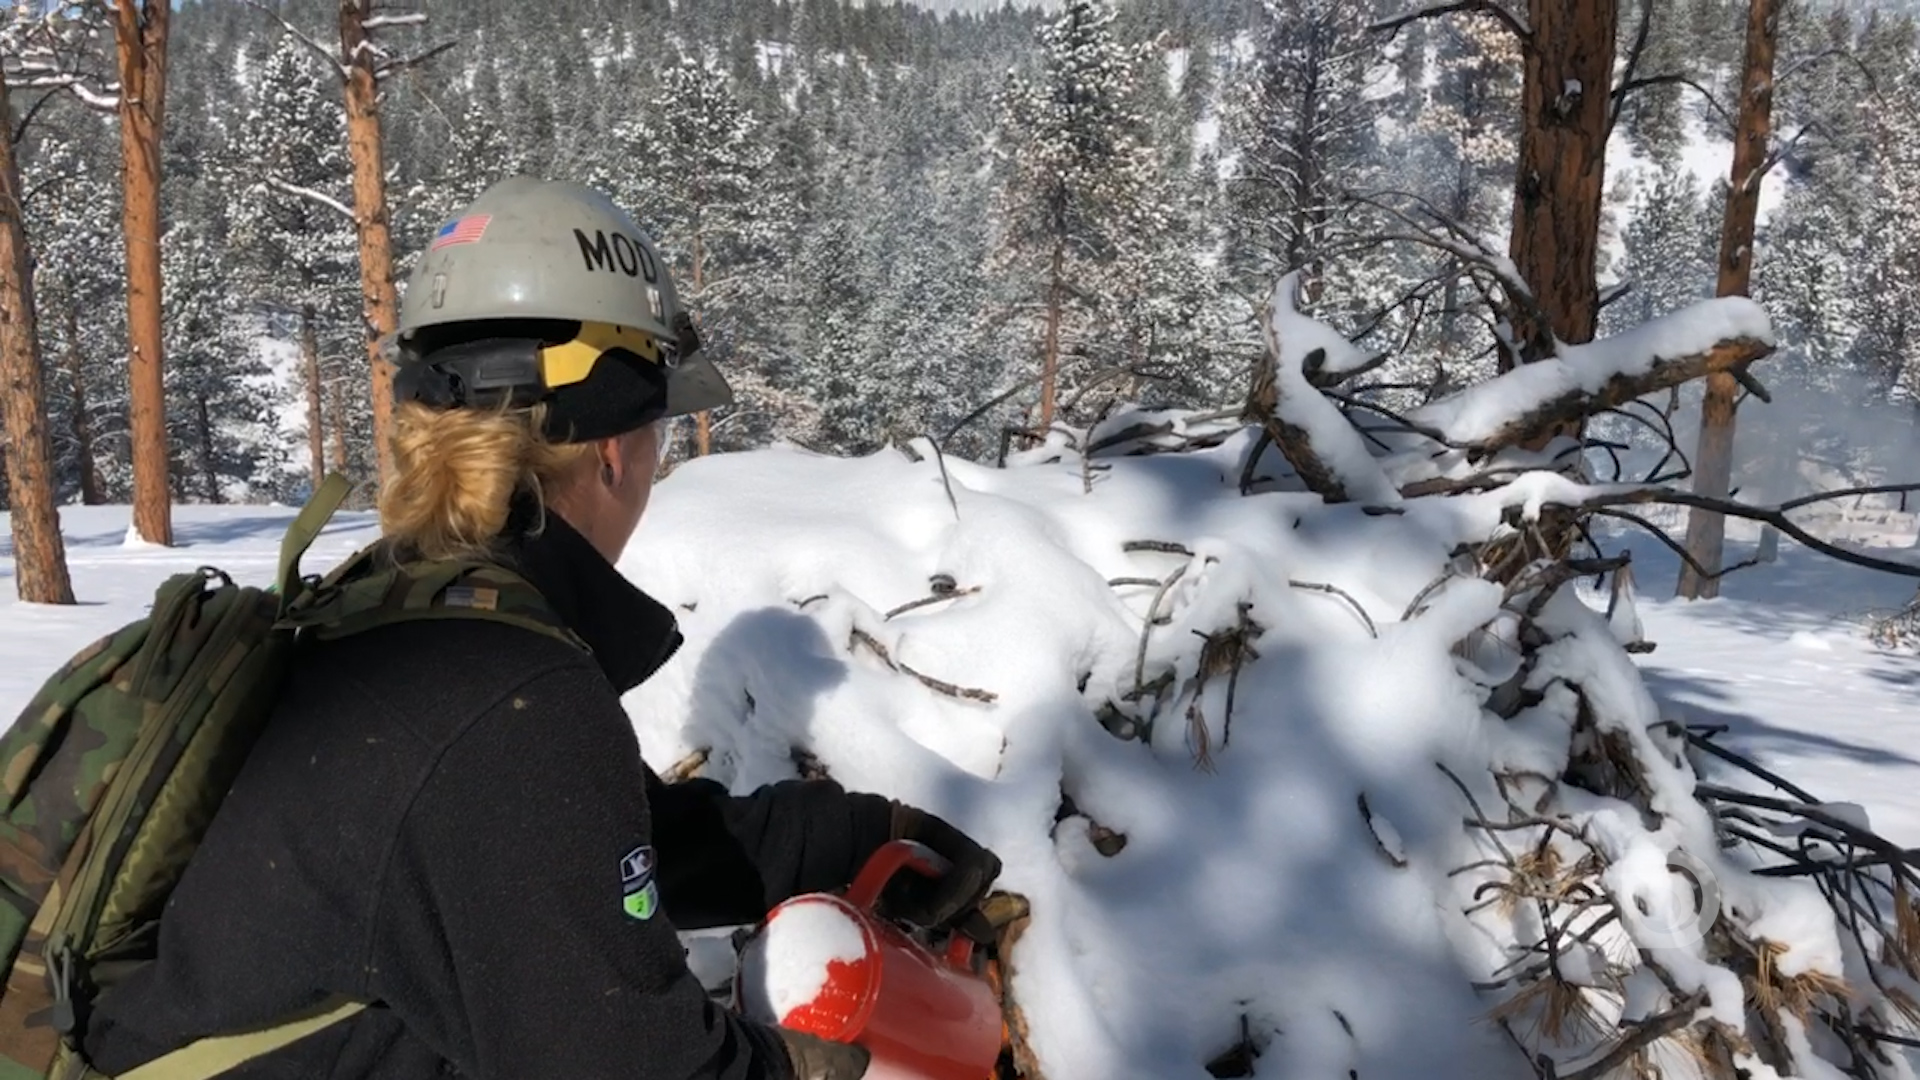 A Mile High Youth Corps member ignites a snow covered pile of branches in the Pike National Forest near Bailey